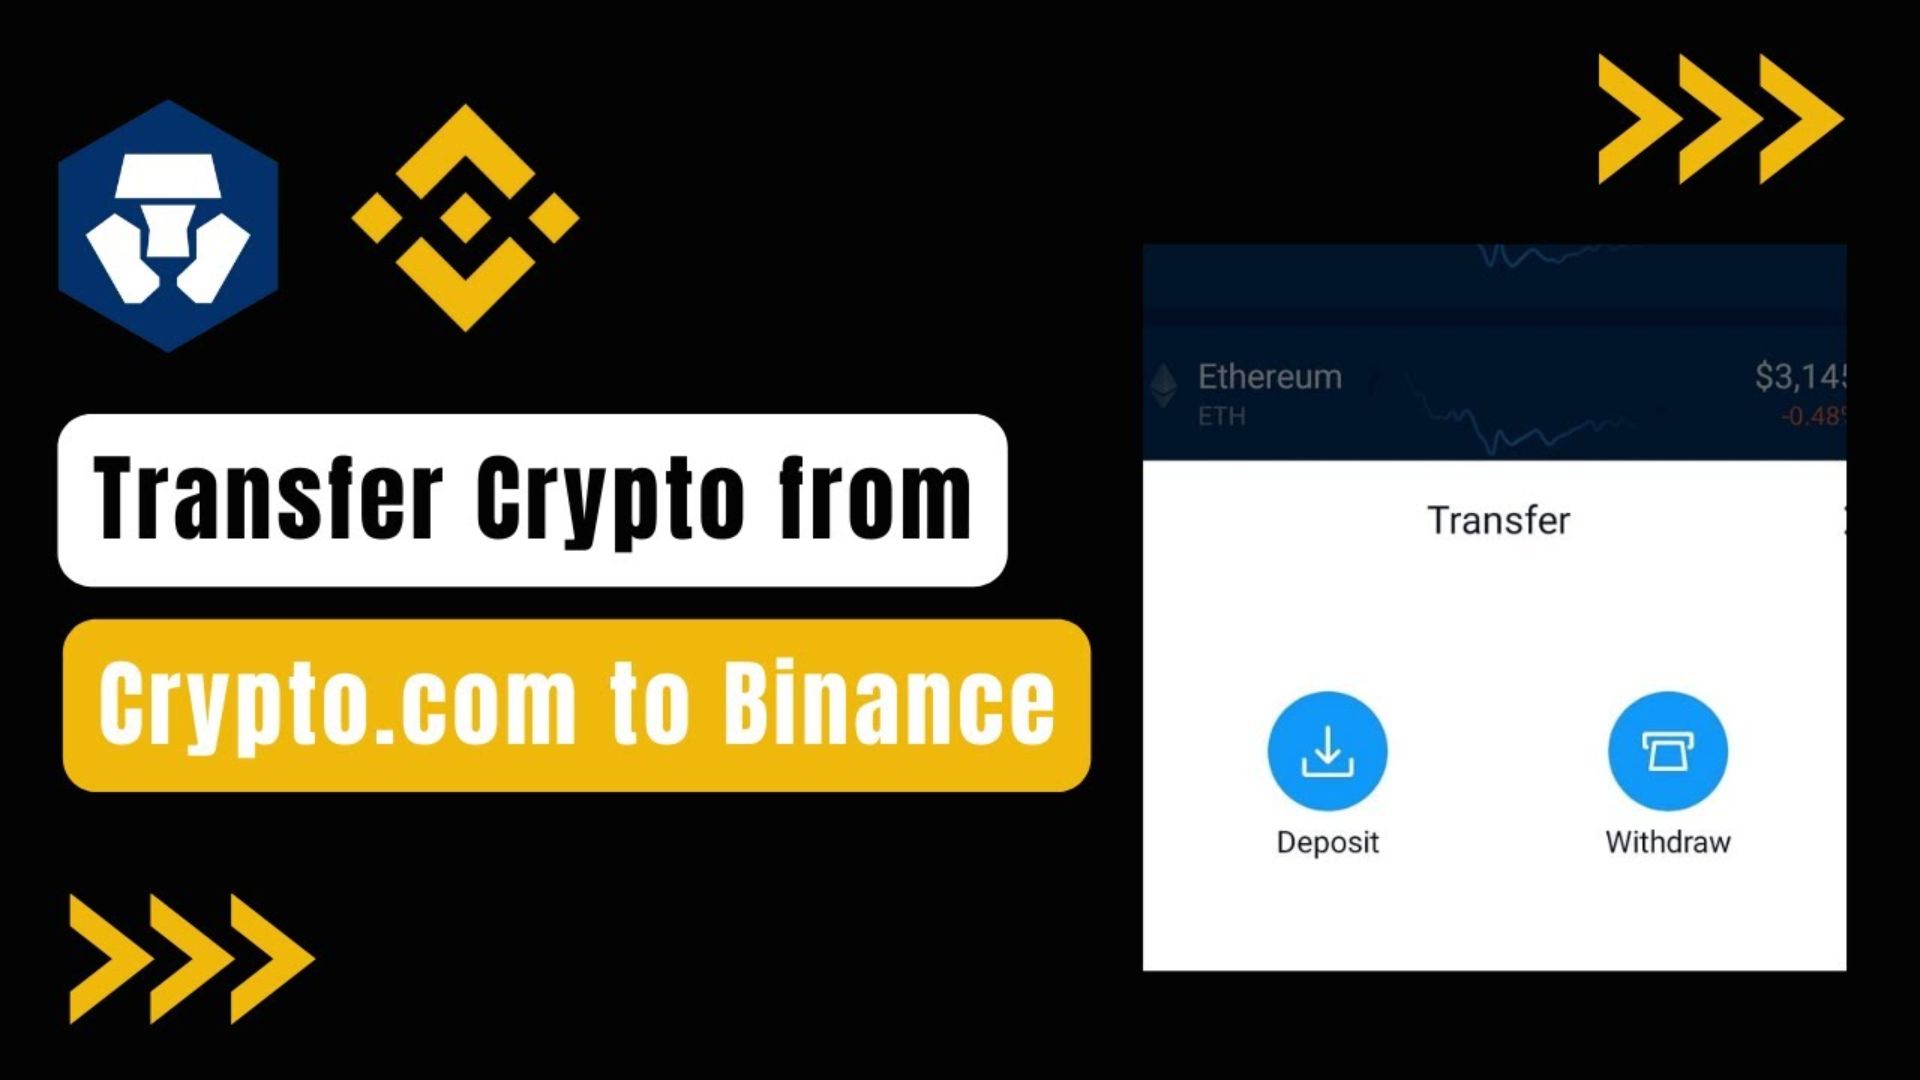 How to Transfer from Crypto.com to Binance